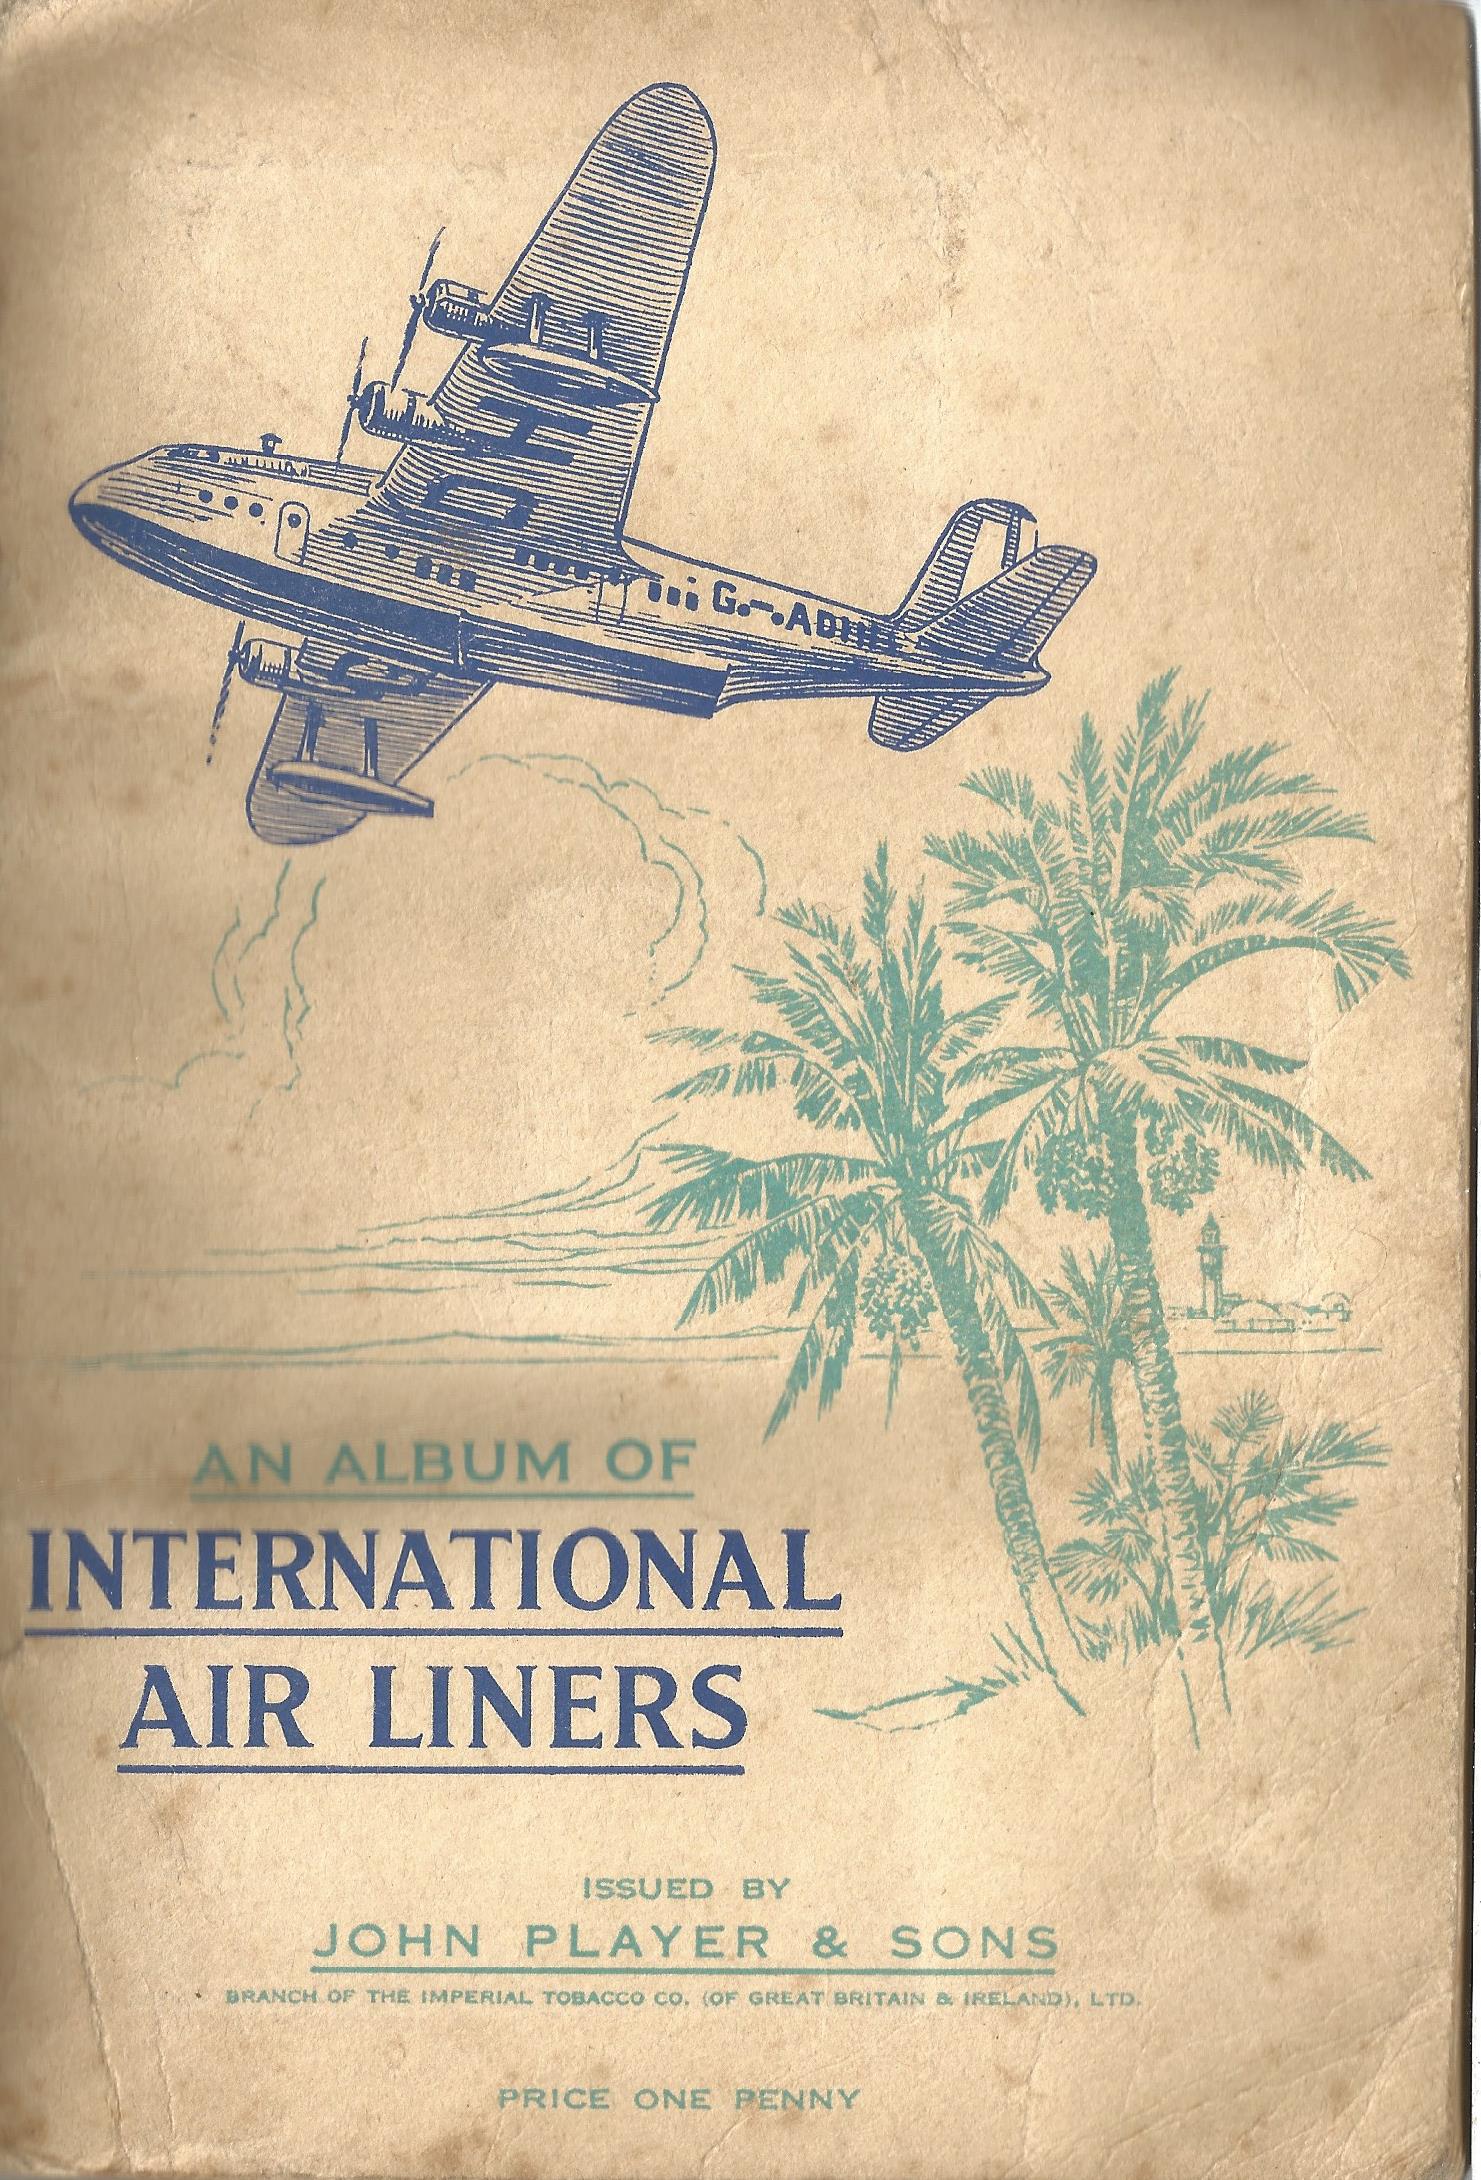 Player's Cigarette Cards, Album of International Air Liners, 1936, 50 cards. Good condition. We